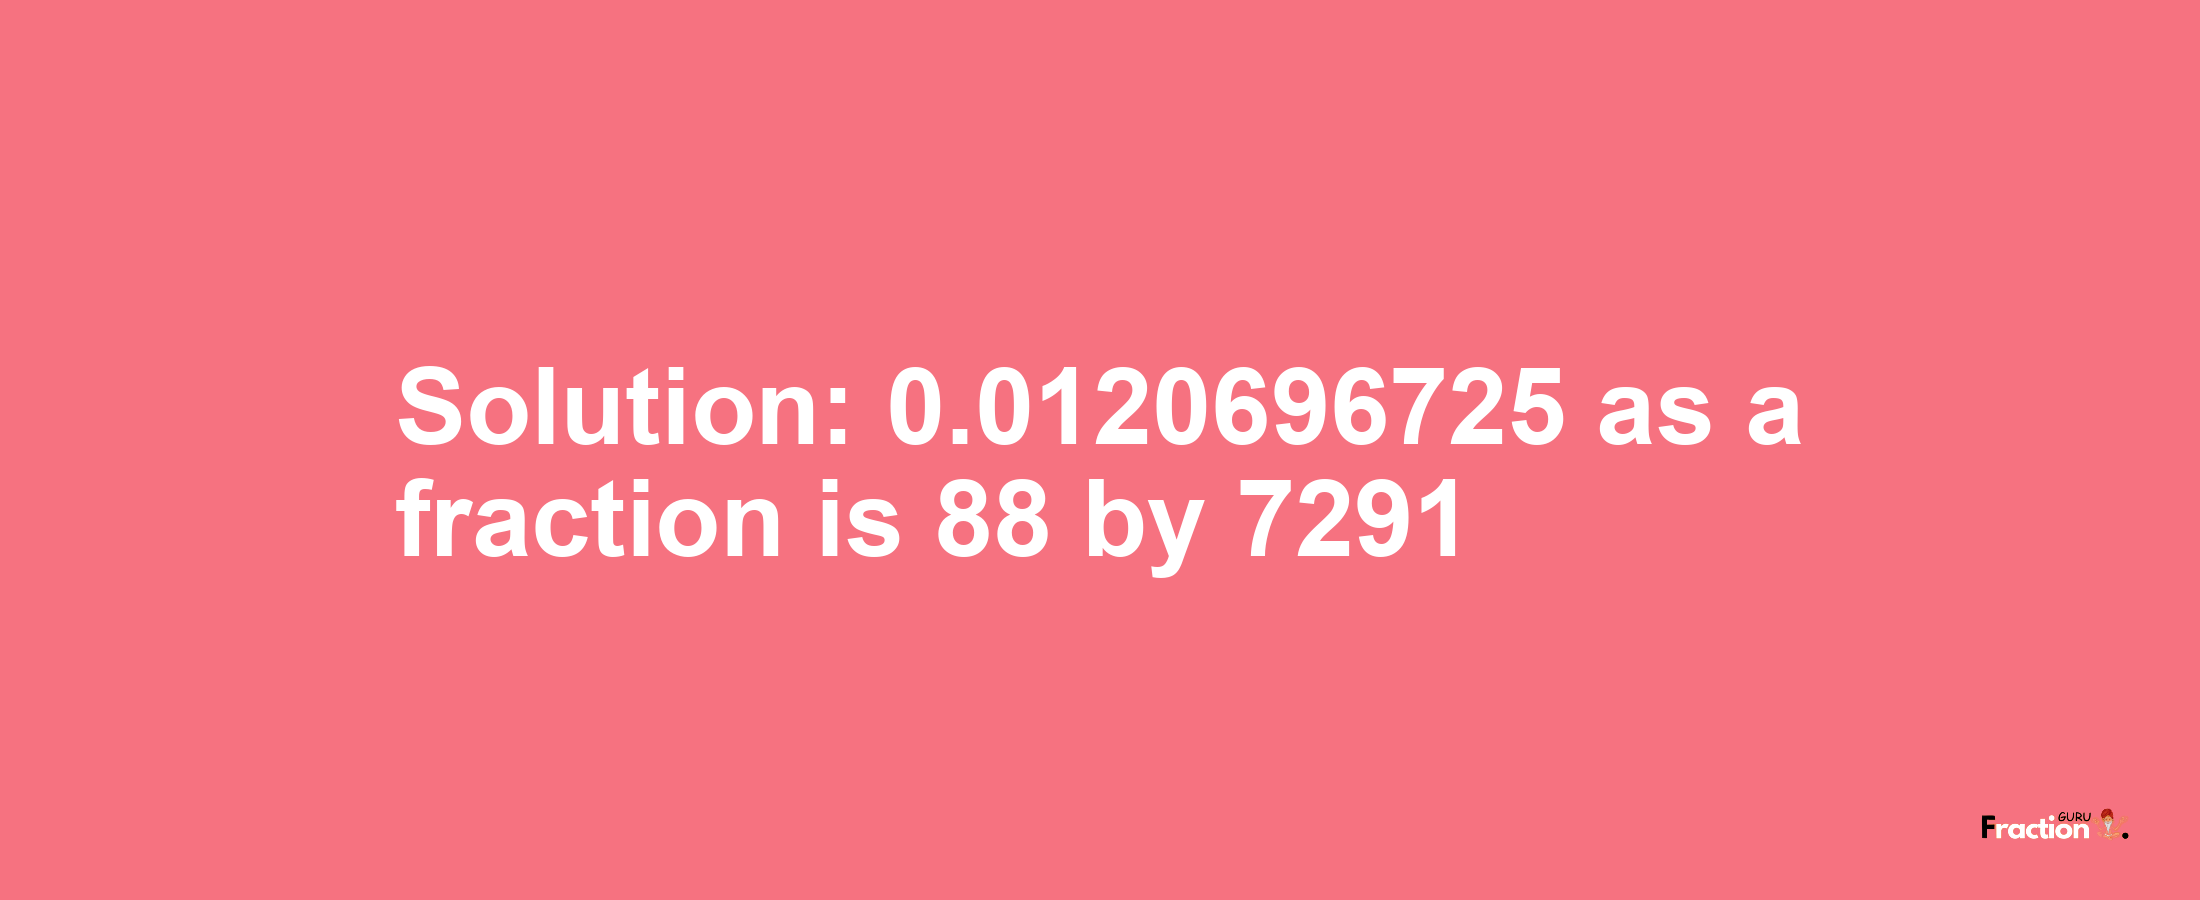 Solution:0.0120696725 as a fraction is 88/7291